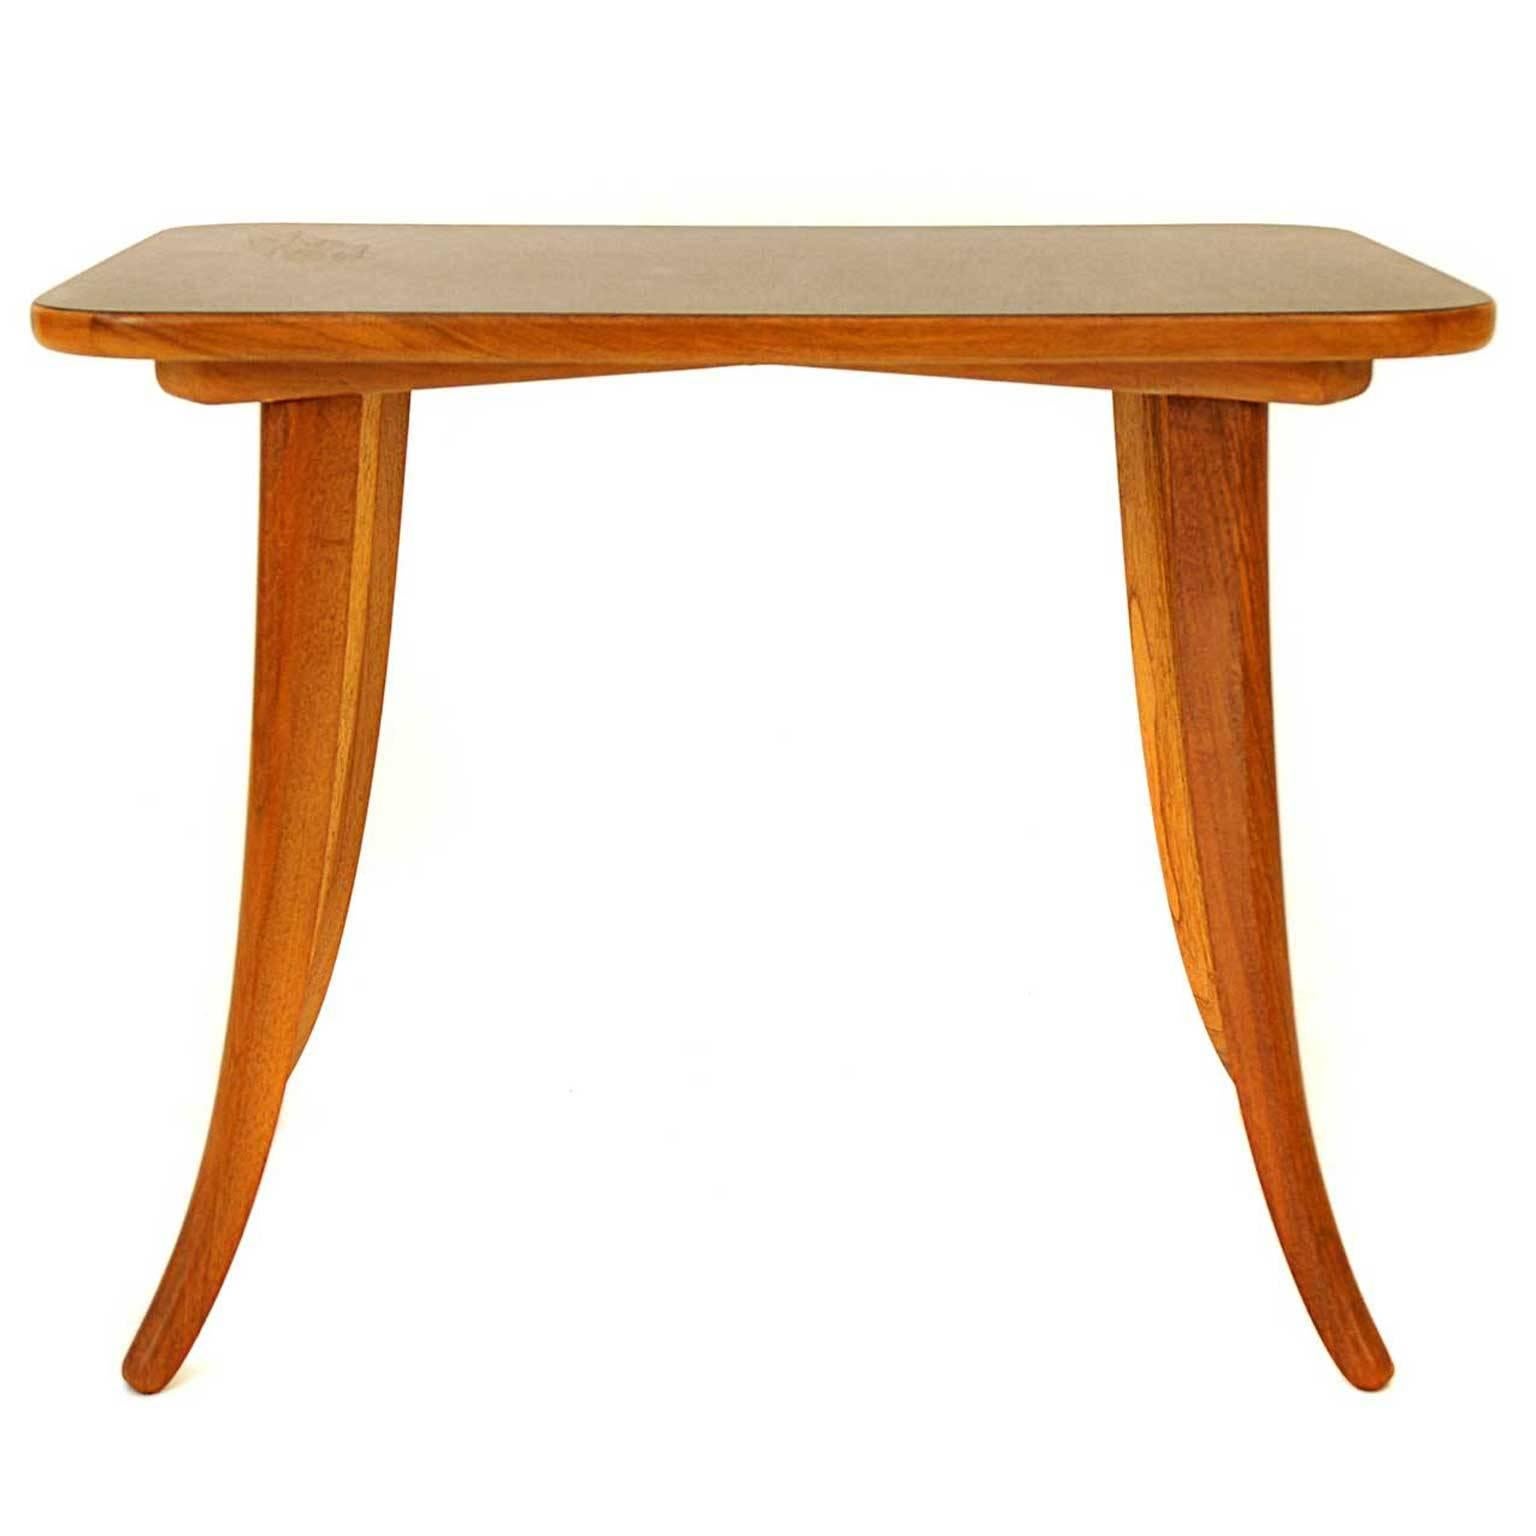 This coffee table was designed by Haus und Garden between 1925-1930. It is made of walnut with lacquered tabletop.